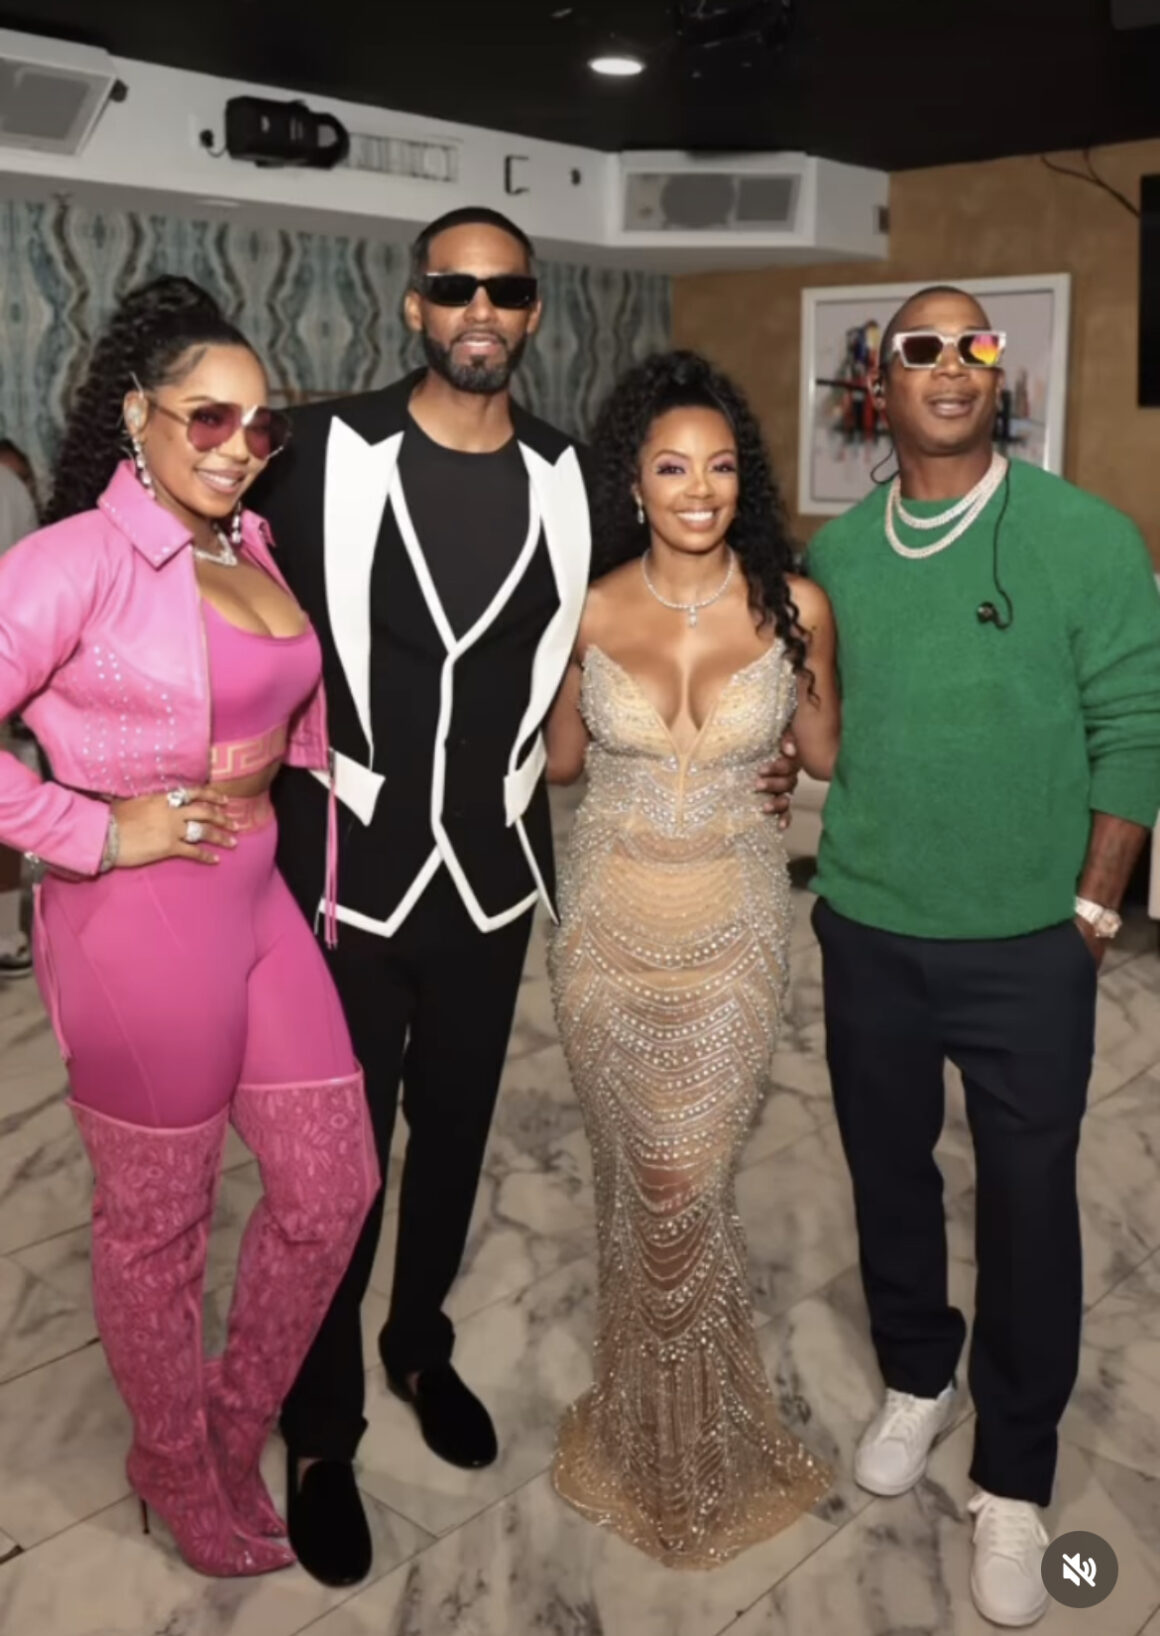 Mielle Organics CEO Monique Rodriguez Celebrated Her 40th Birthday in a Pink Custom Nicole Felicia Gown with Rene Caovilla Heels to her Cirque Du Moleil Theme Party More JaRule And Ashanti